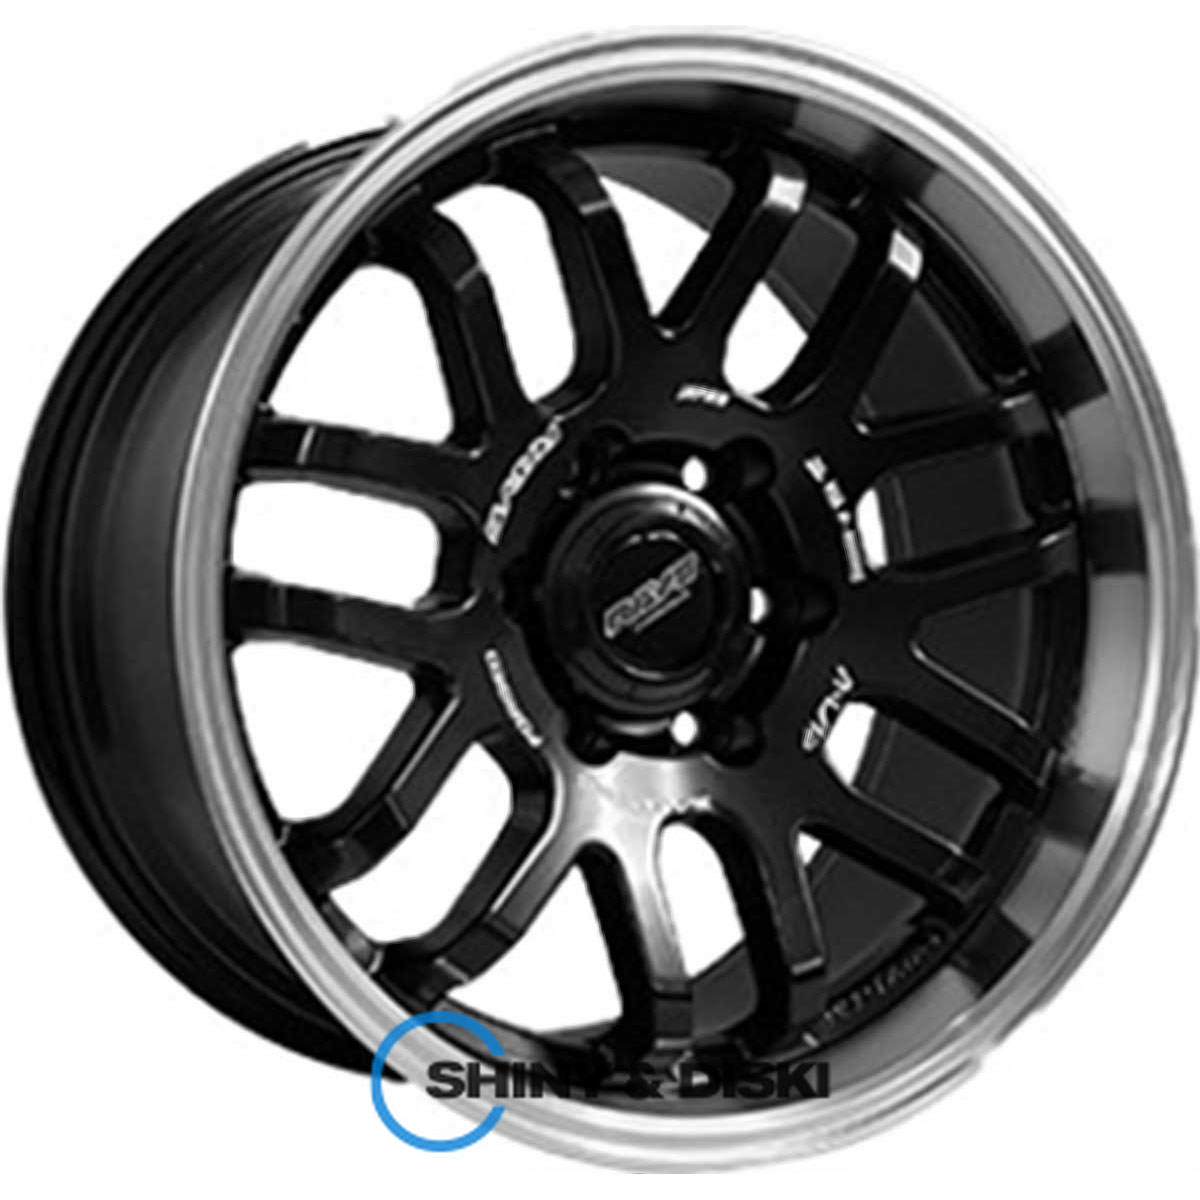 off road wheels ow7008 mbml